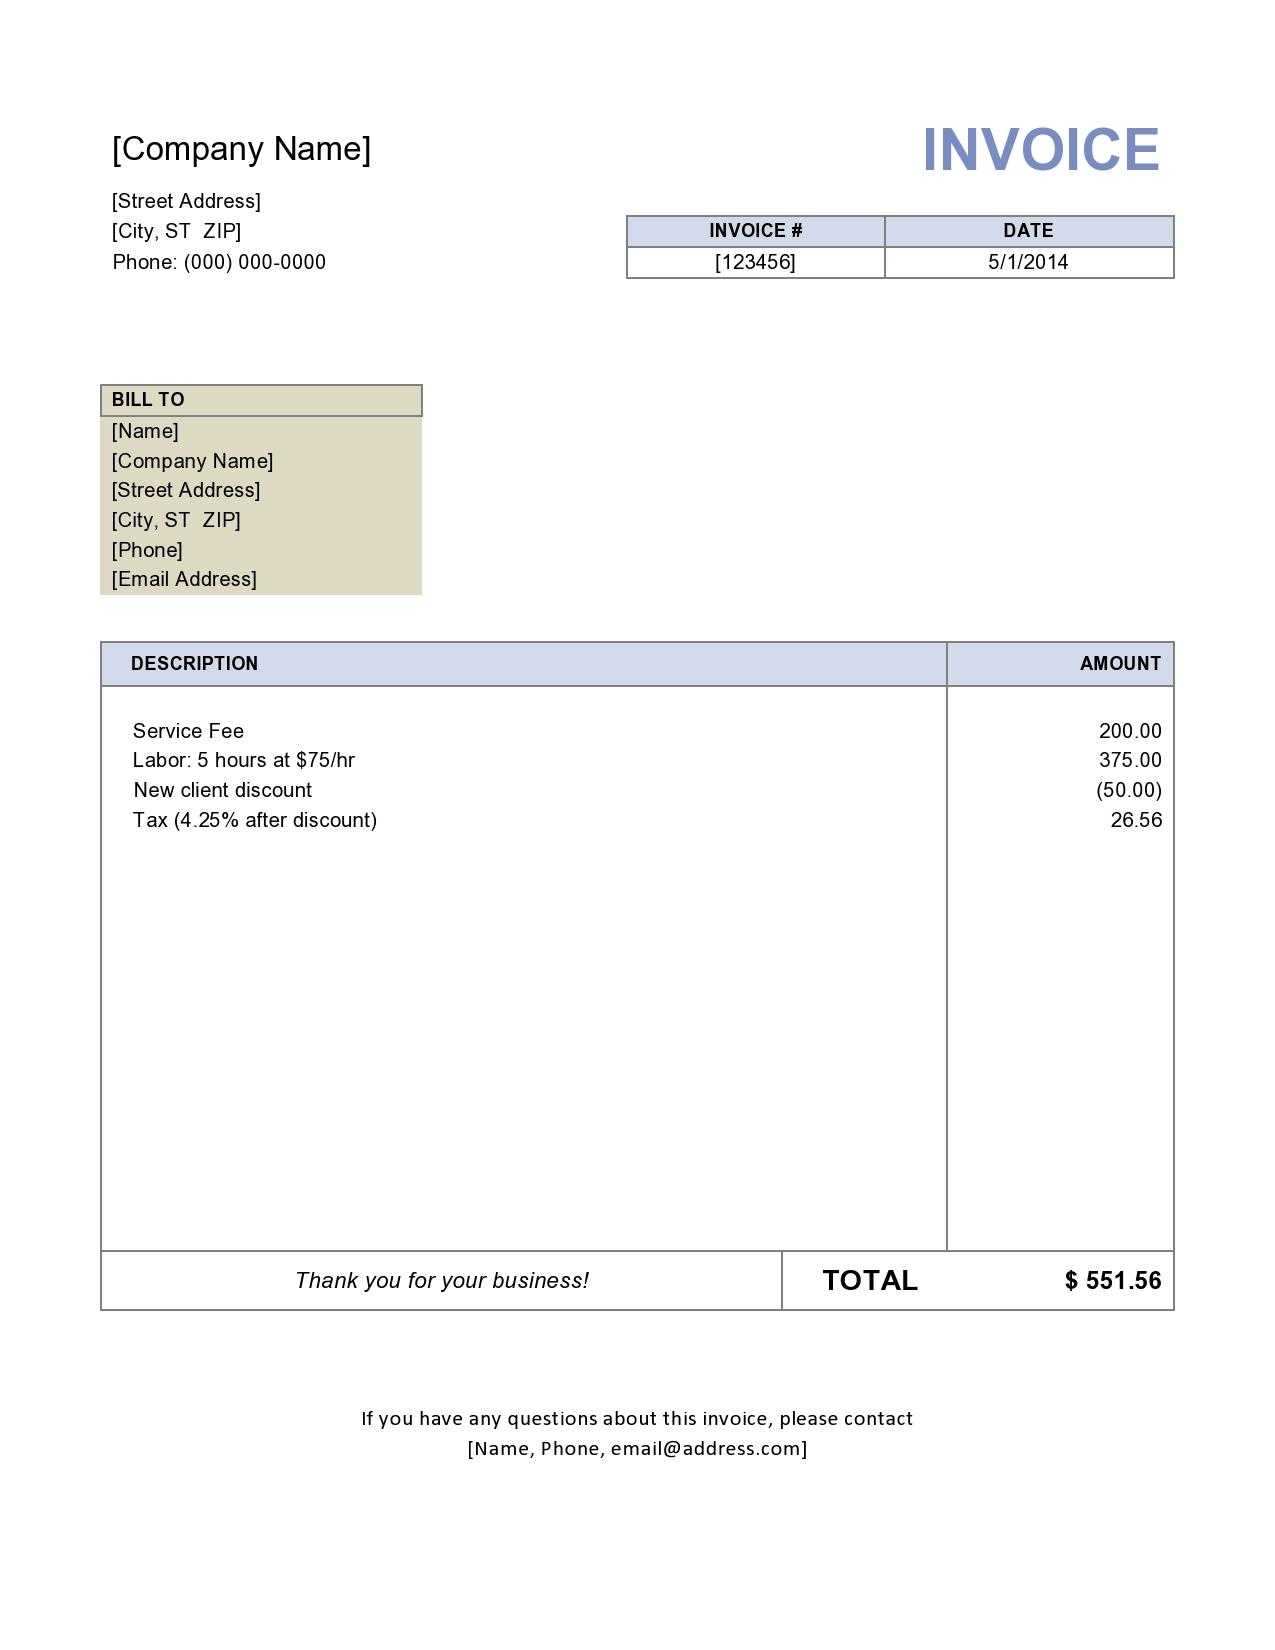 Invoice Template Free | Small Business Invoice Template Regarding Free Invoice Template Word Mac